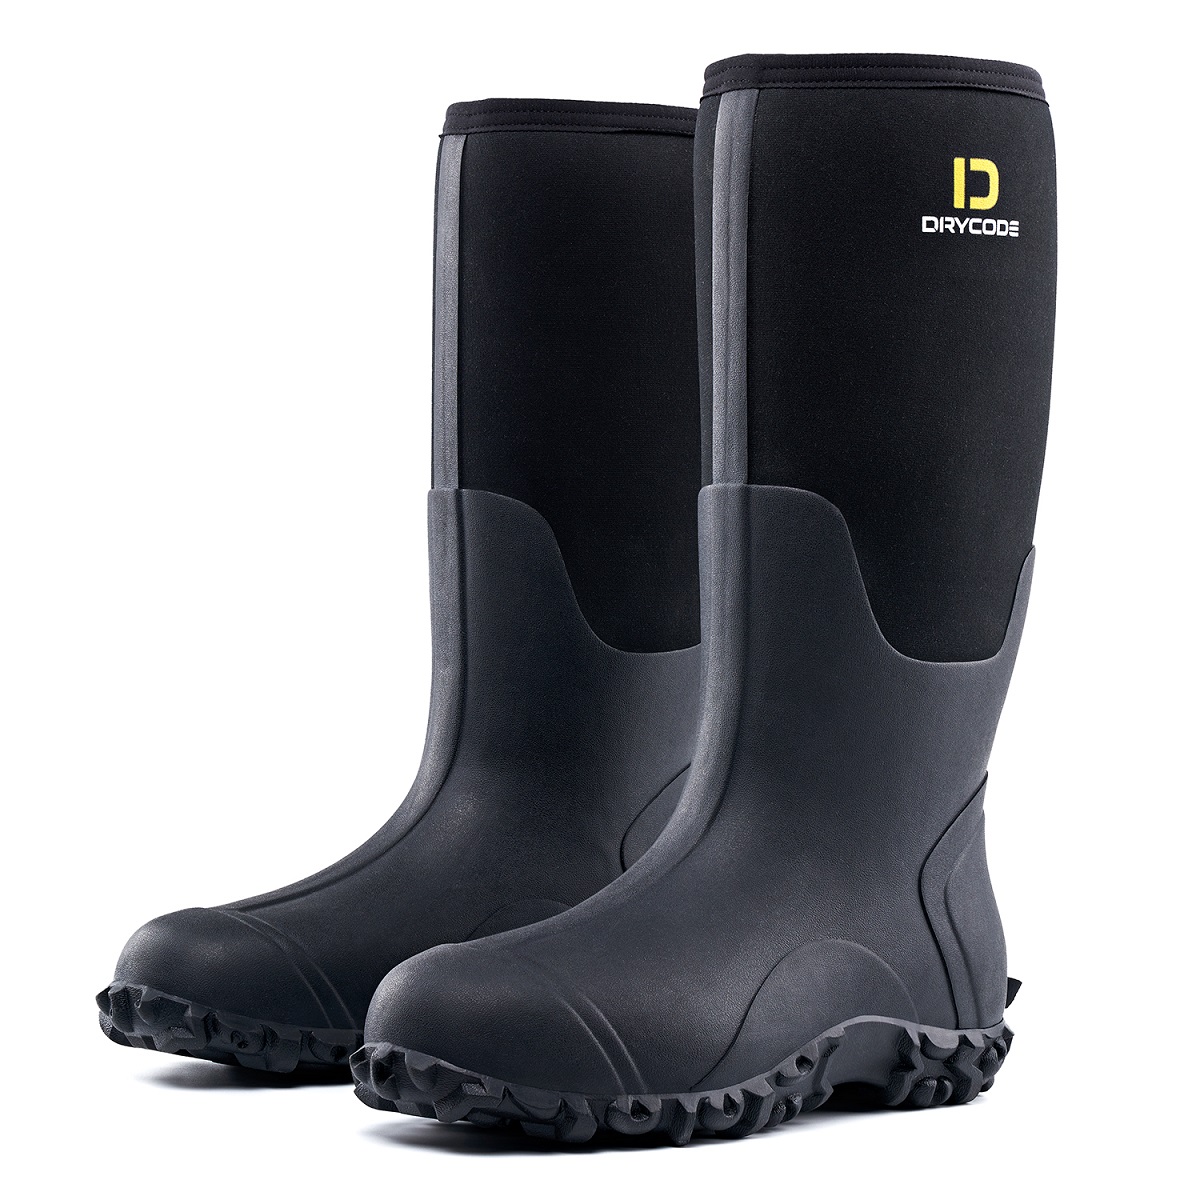 Outdoor Anti Slip Durable Rubber Boots